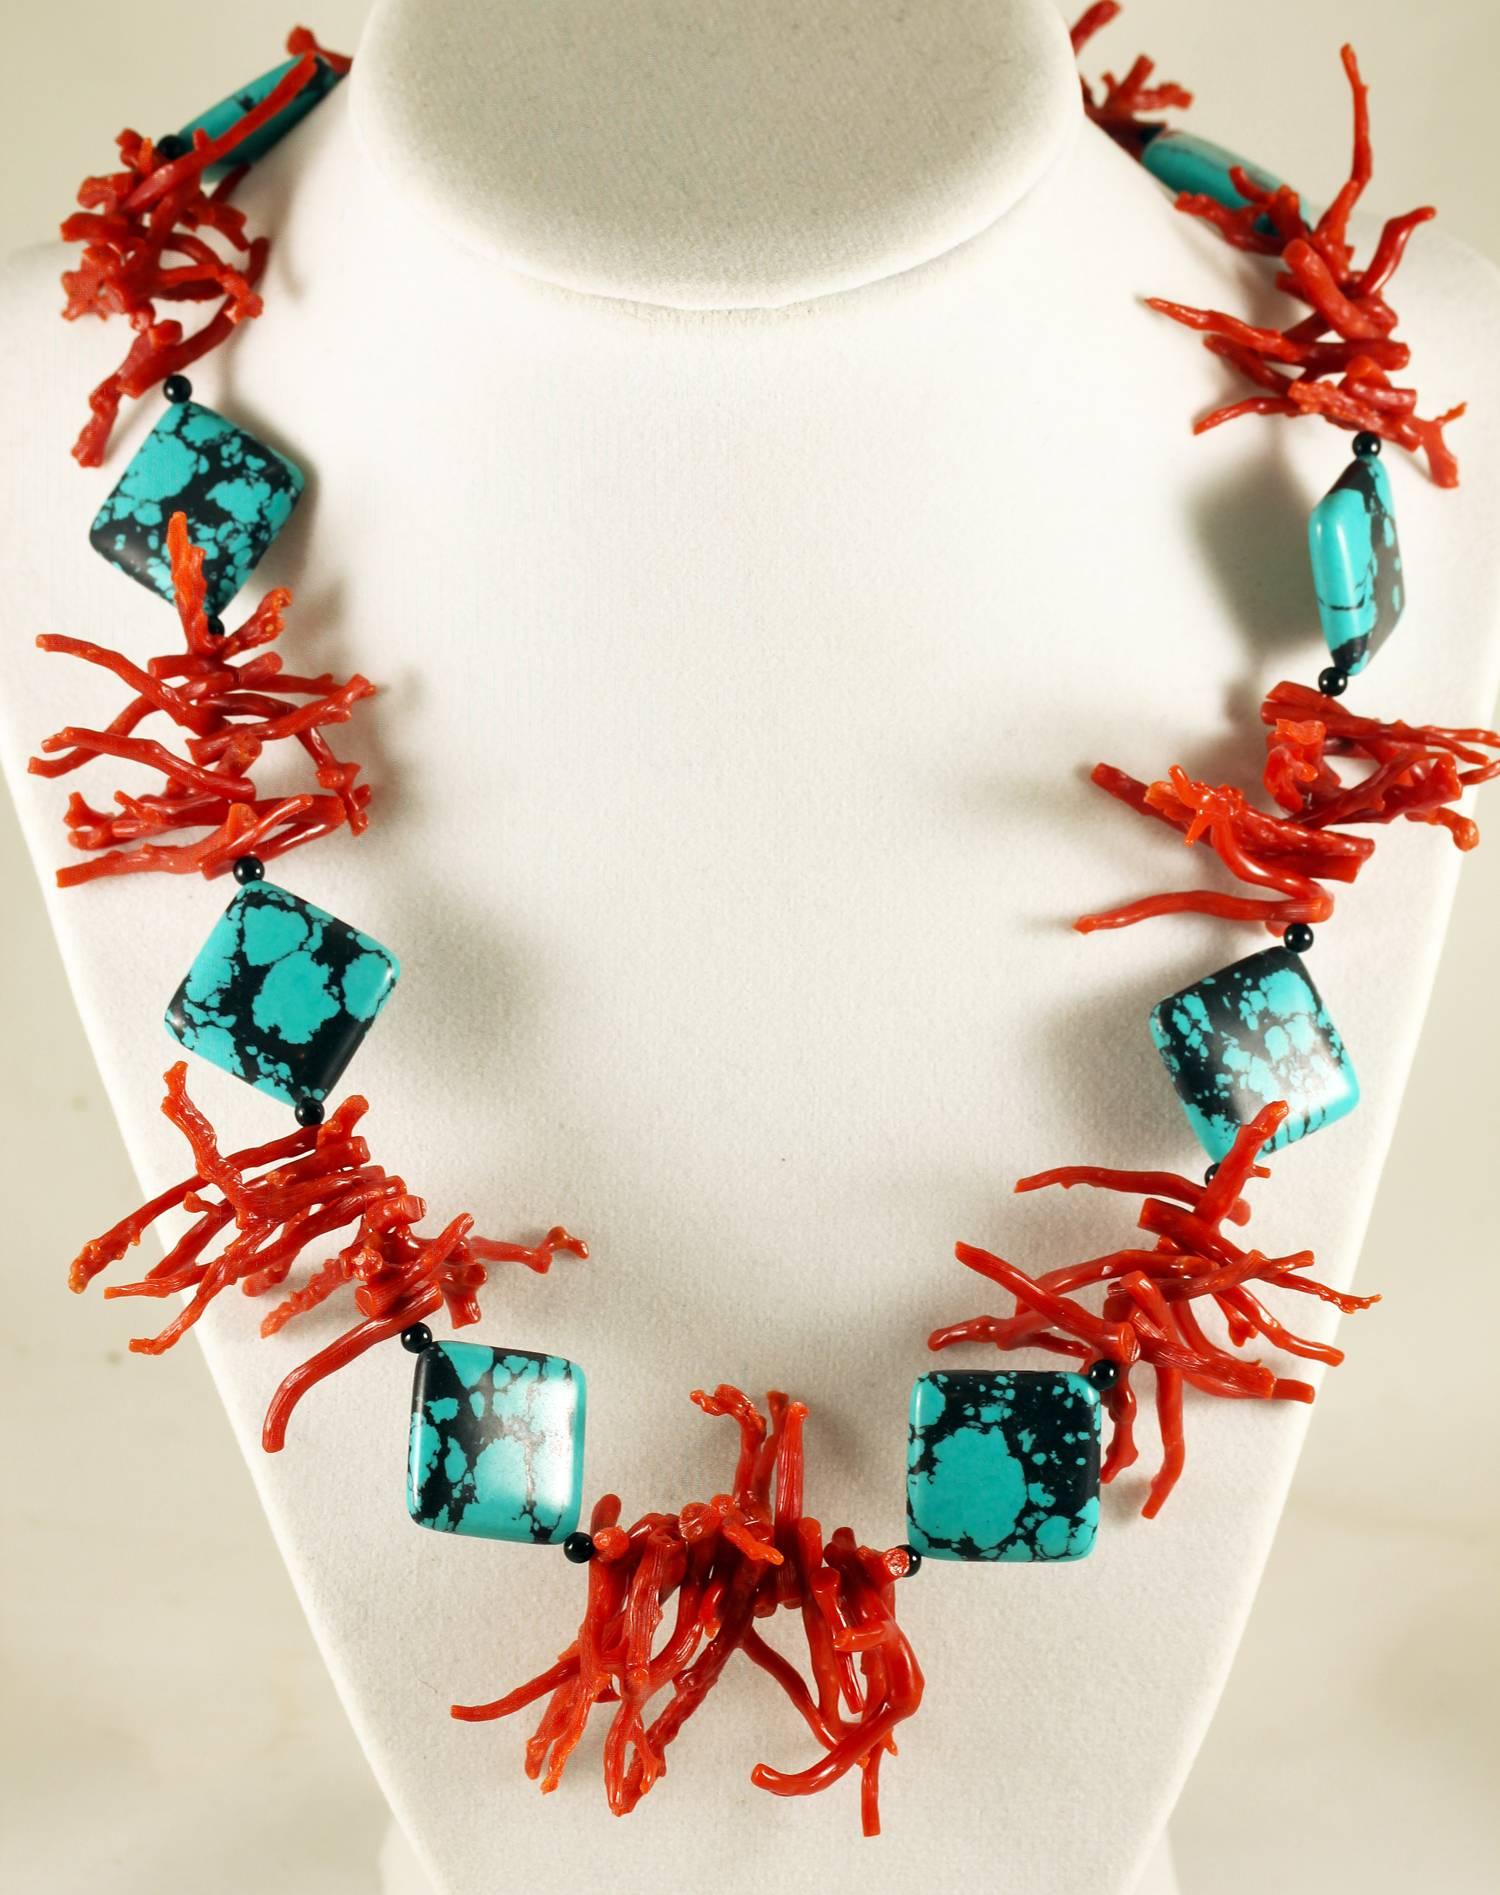 Single strand of fine natural very rare delicate red Coral branches enhance this deep sky blue Arizona Turquoise accented with black Onyx.  The necklace is comfortable 20 inches and the coral branches are approximately 20mm.  The clasp is silver